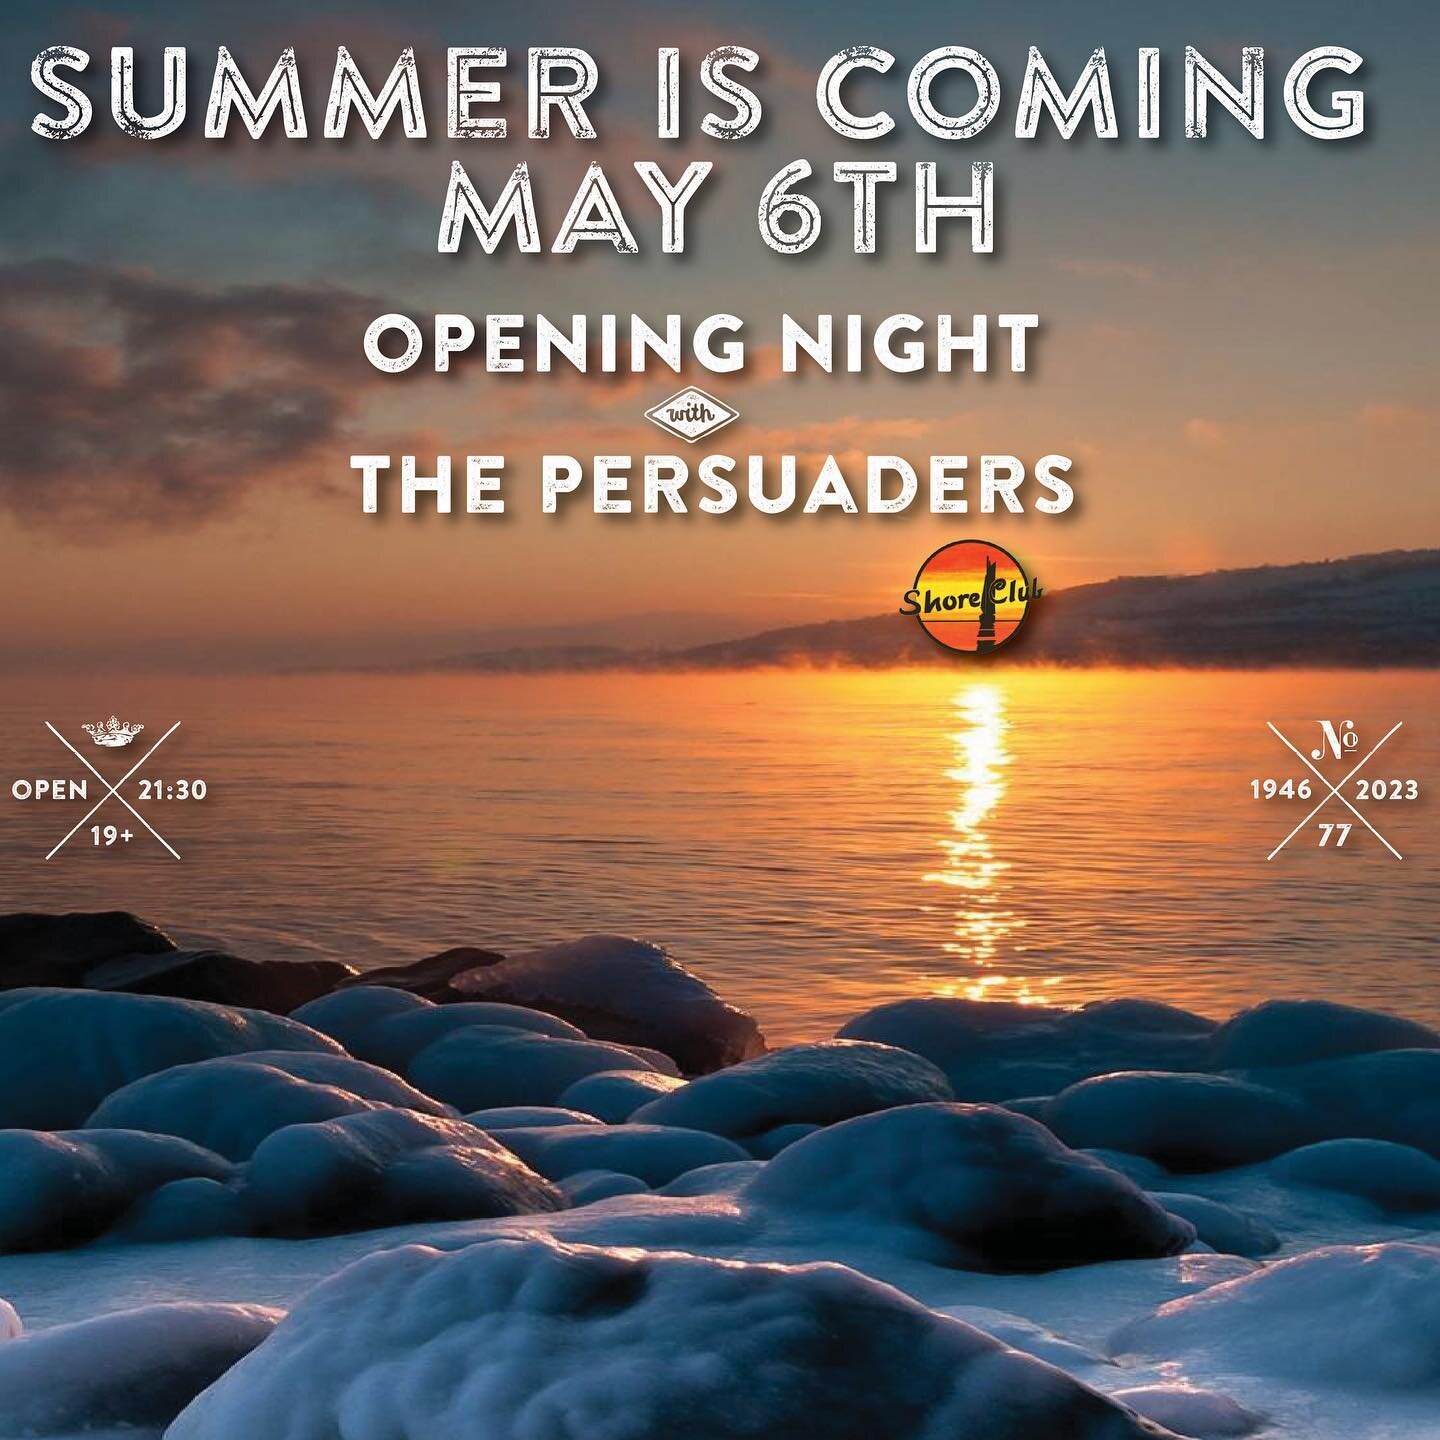 Our 77th Summer starts this Saturday with The Persuaders live on stage at 9:30. Grease up those gears, it&rsquo;s time to get the rust off. We have a great summer line up planned!
.
.
#summerof77 #hubbards #shoreclub #halifax #livemusic